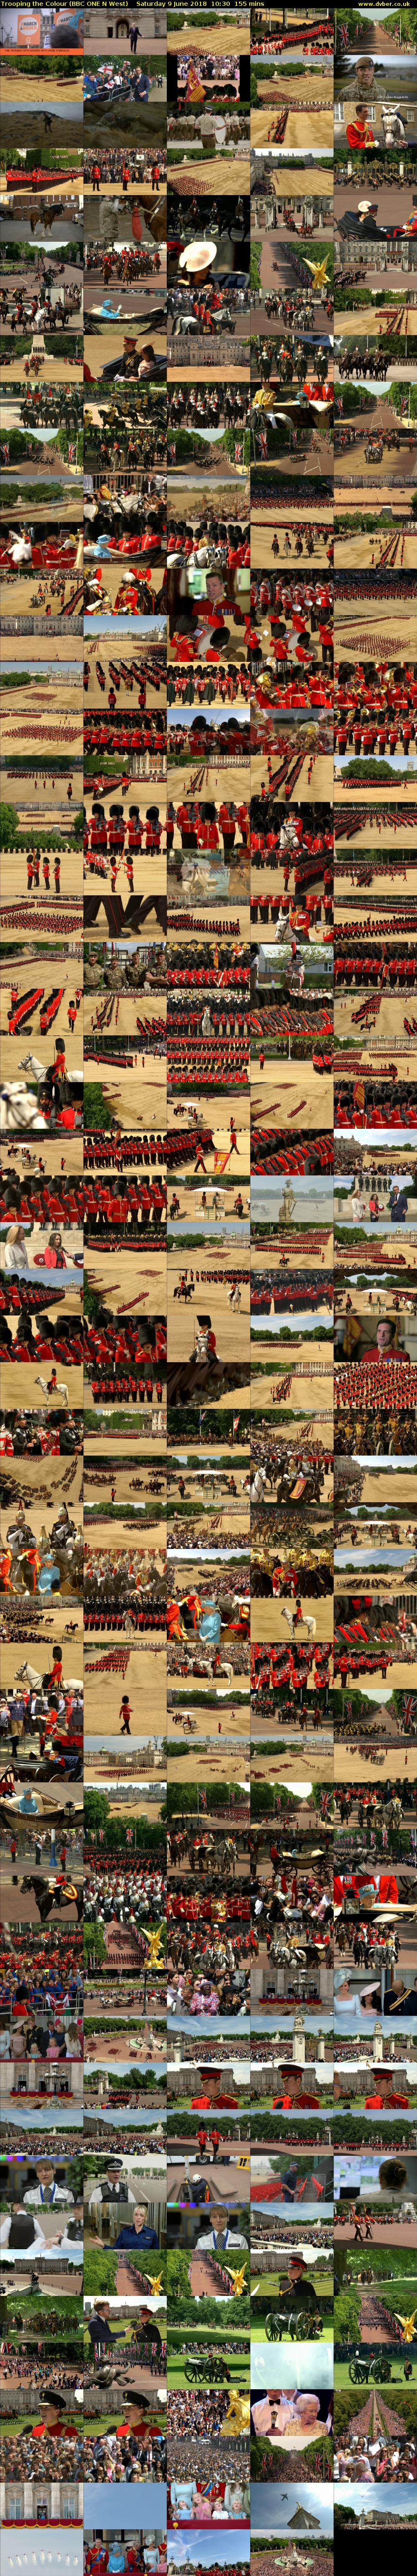 Trooping the Colour (BBC ONE N West) Saturday 9 June 2018 10:30 - 13:05